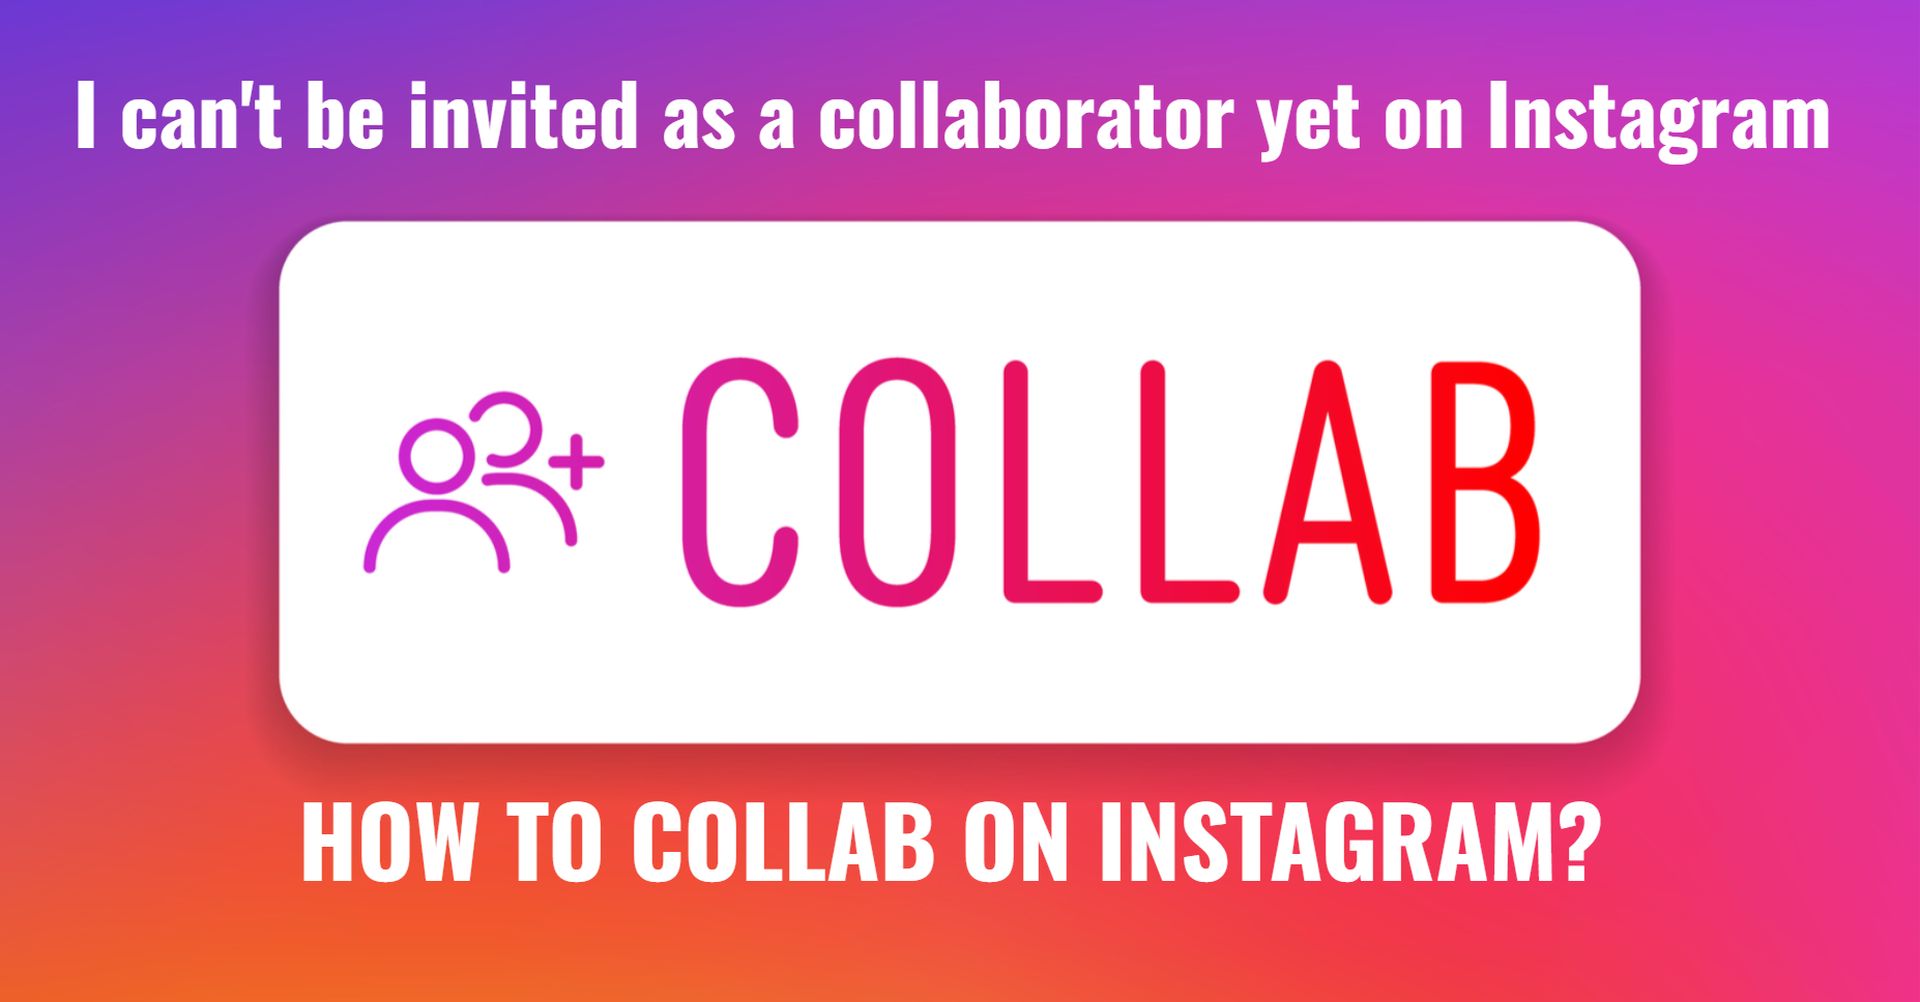 Answering the most common questions about the Instagram collab feature